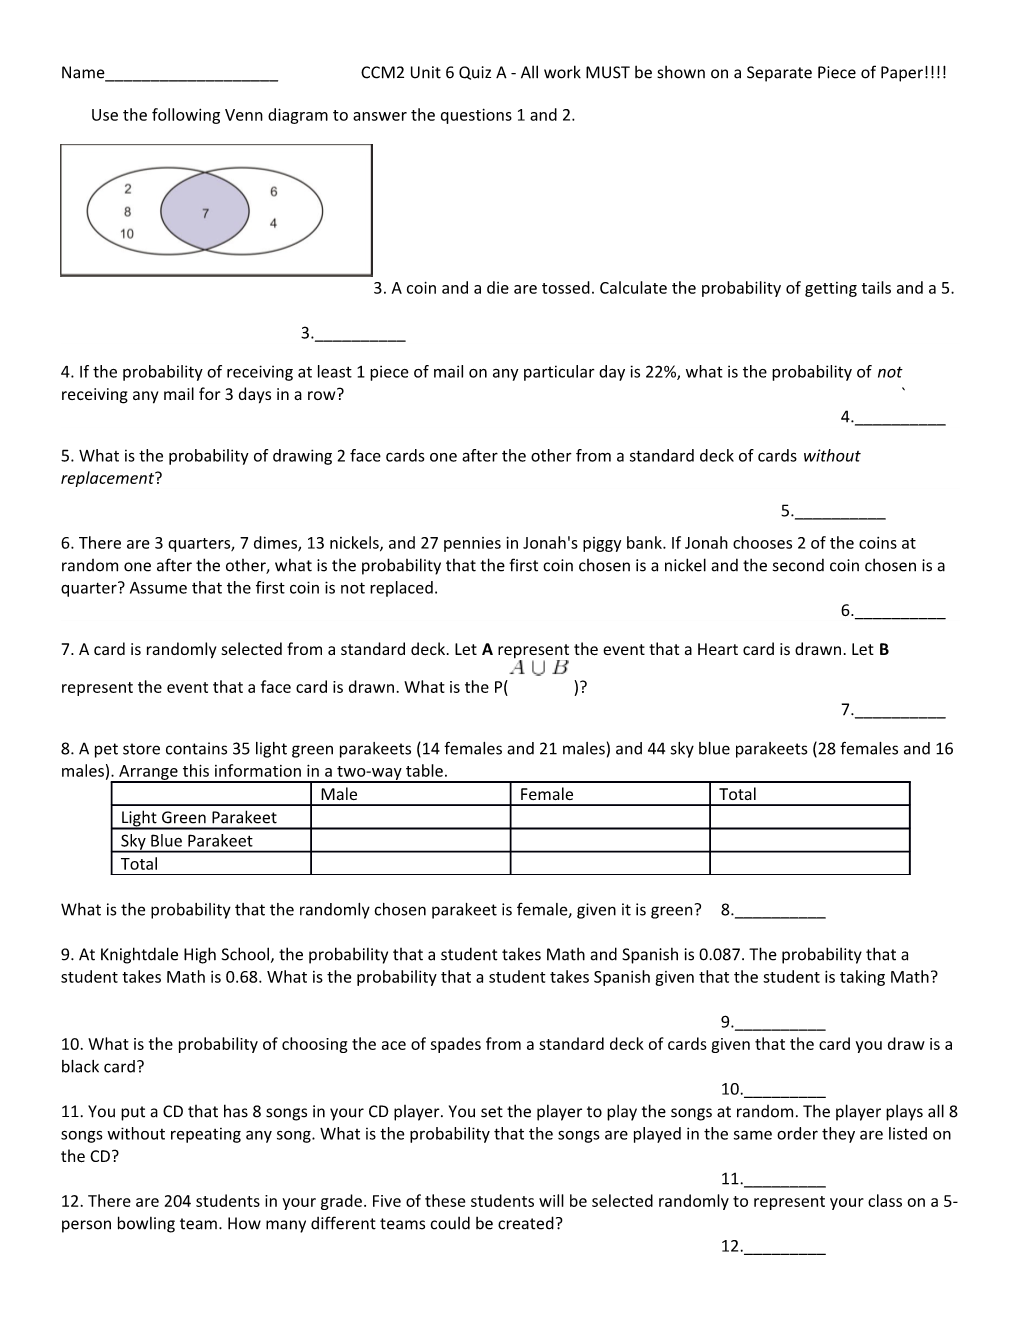 Name______CCM2 Unit 6 Quiz a - All Work MUST Be Shown on a Separate Piece of Paper